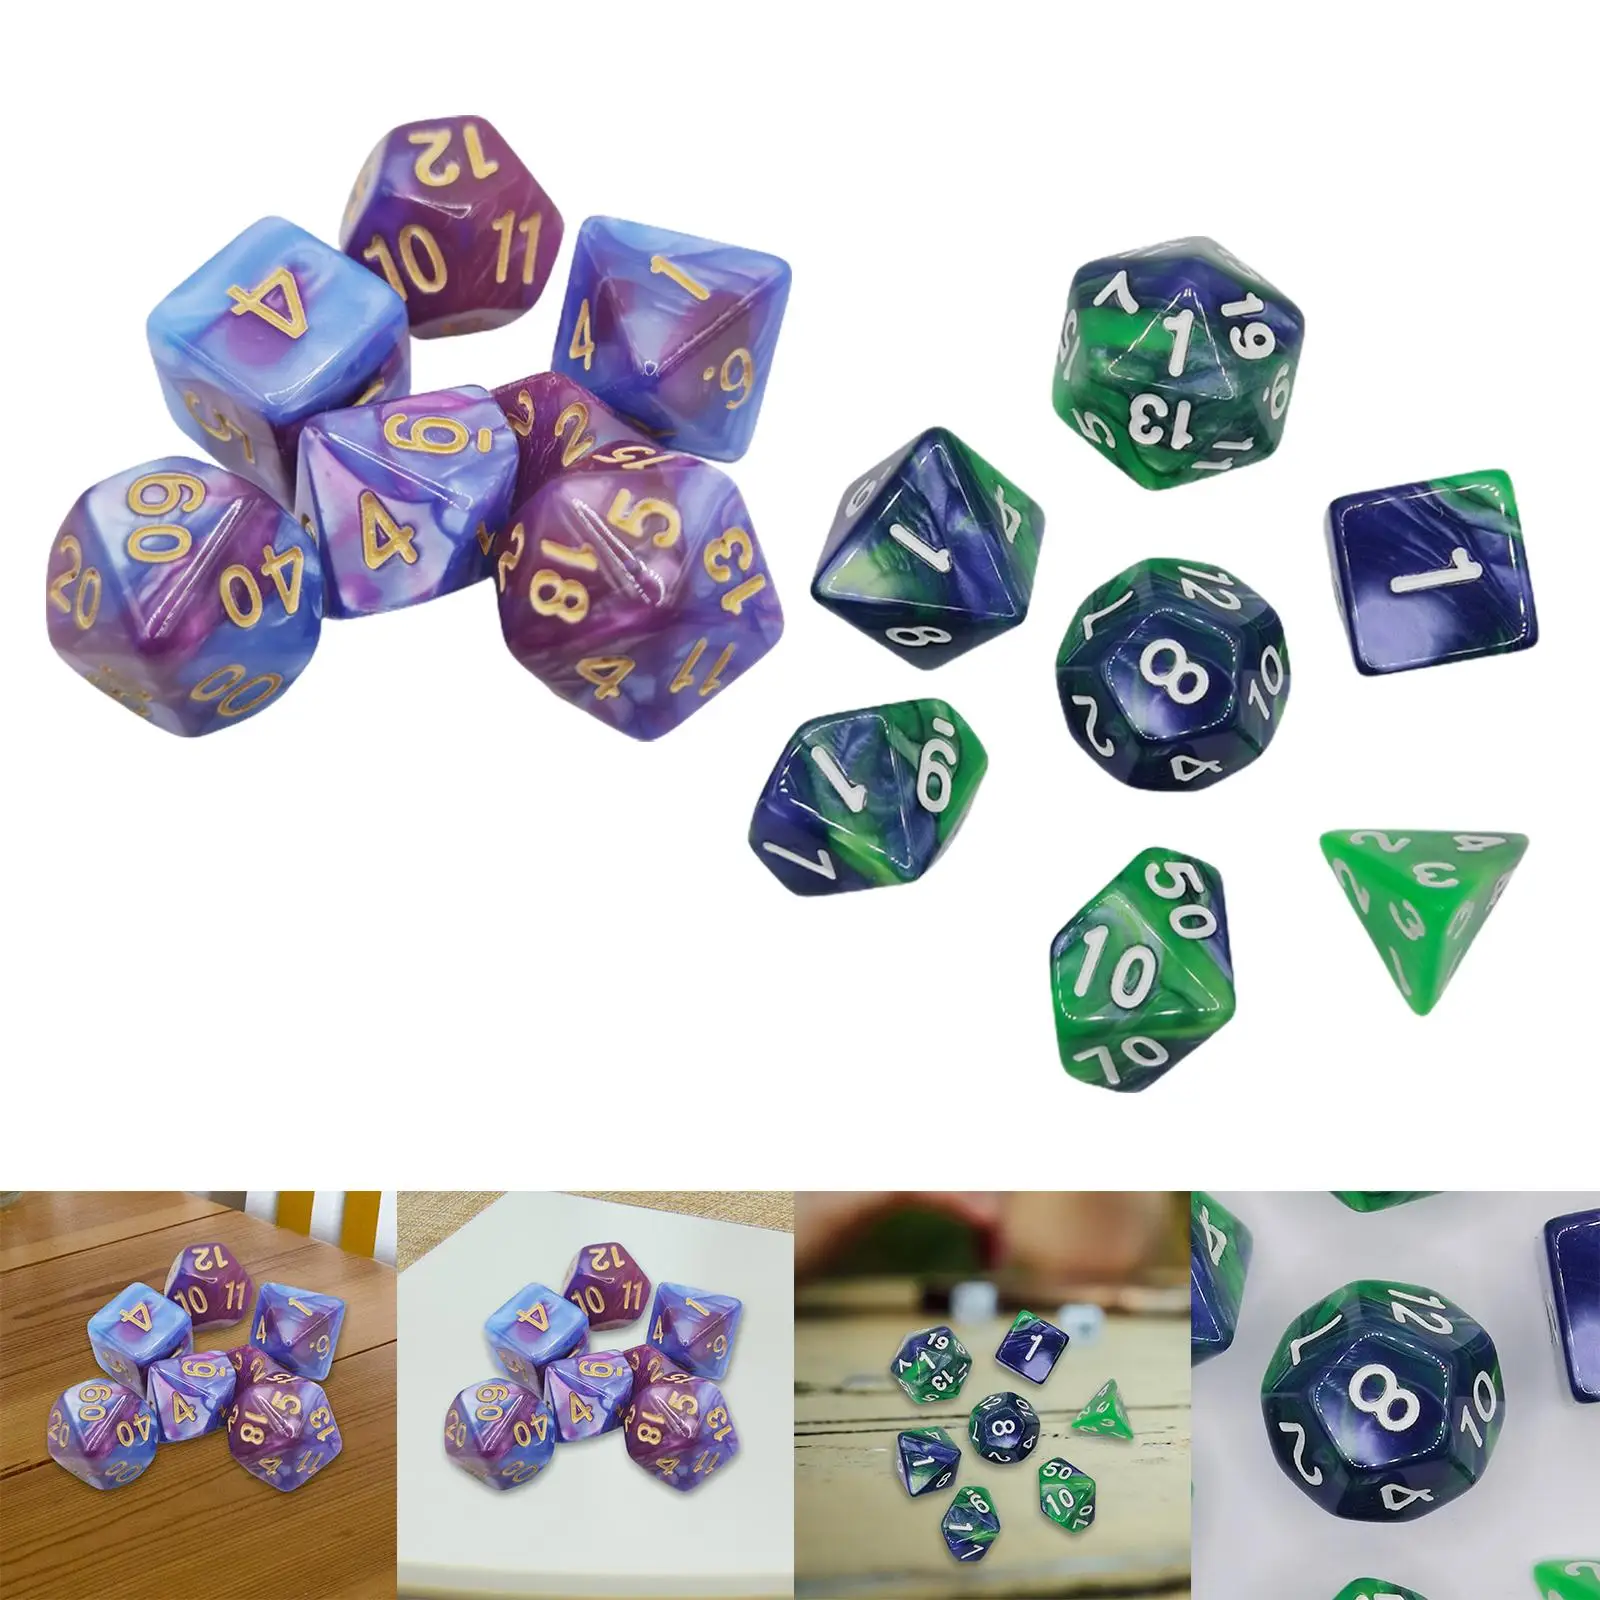 7 Pieces Polyhedral Dice Round Corner Acrylic Dice for Table Games Party Favors